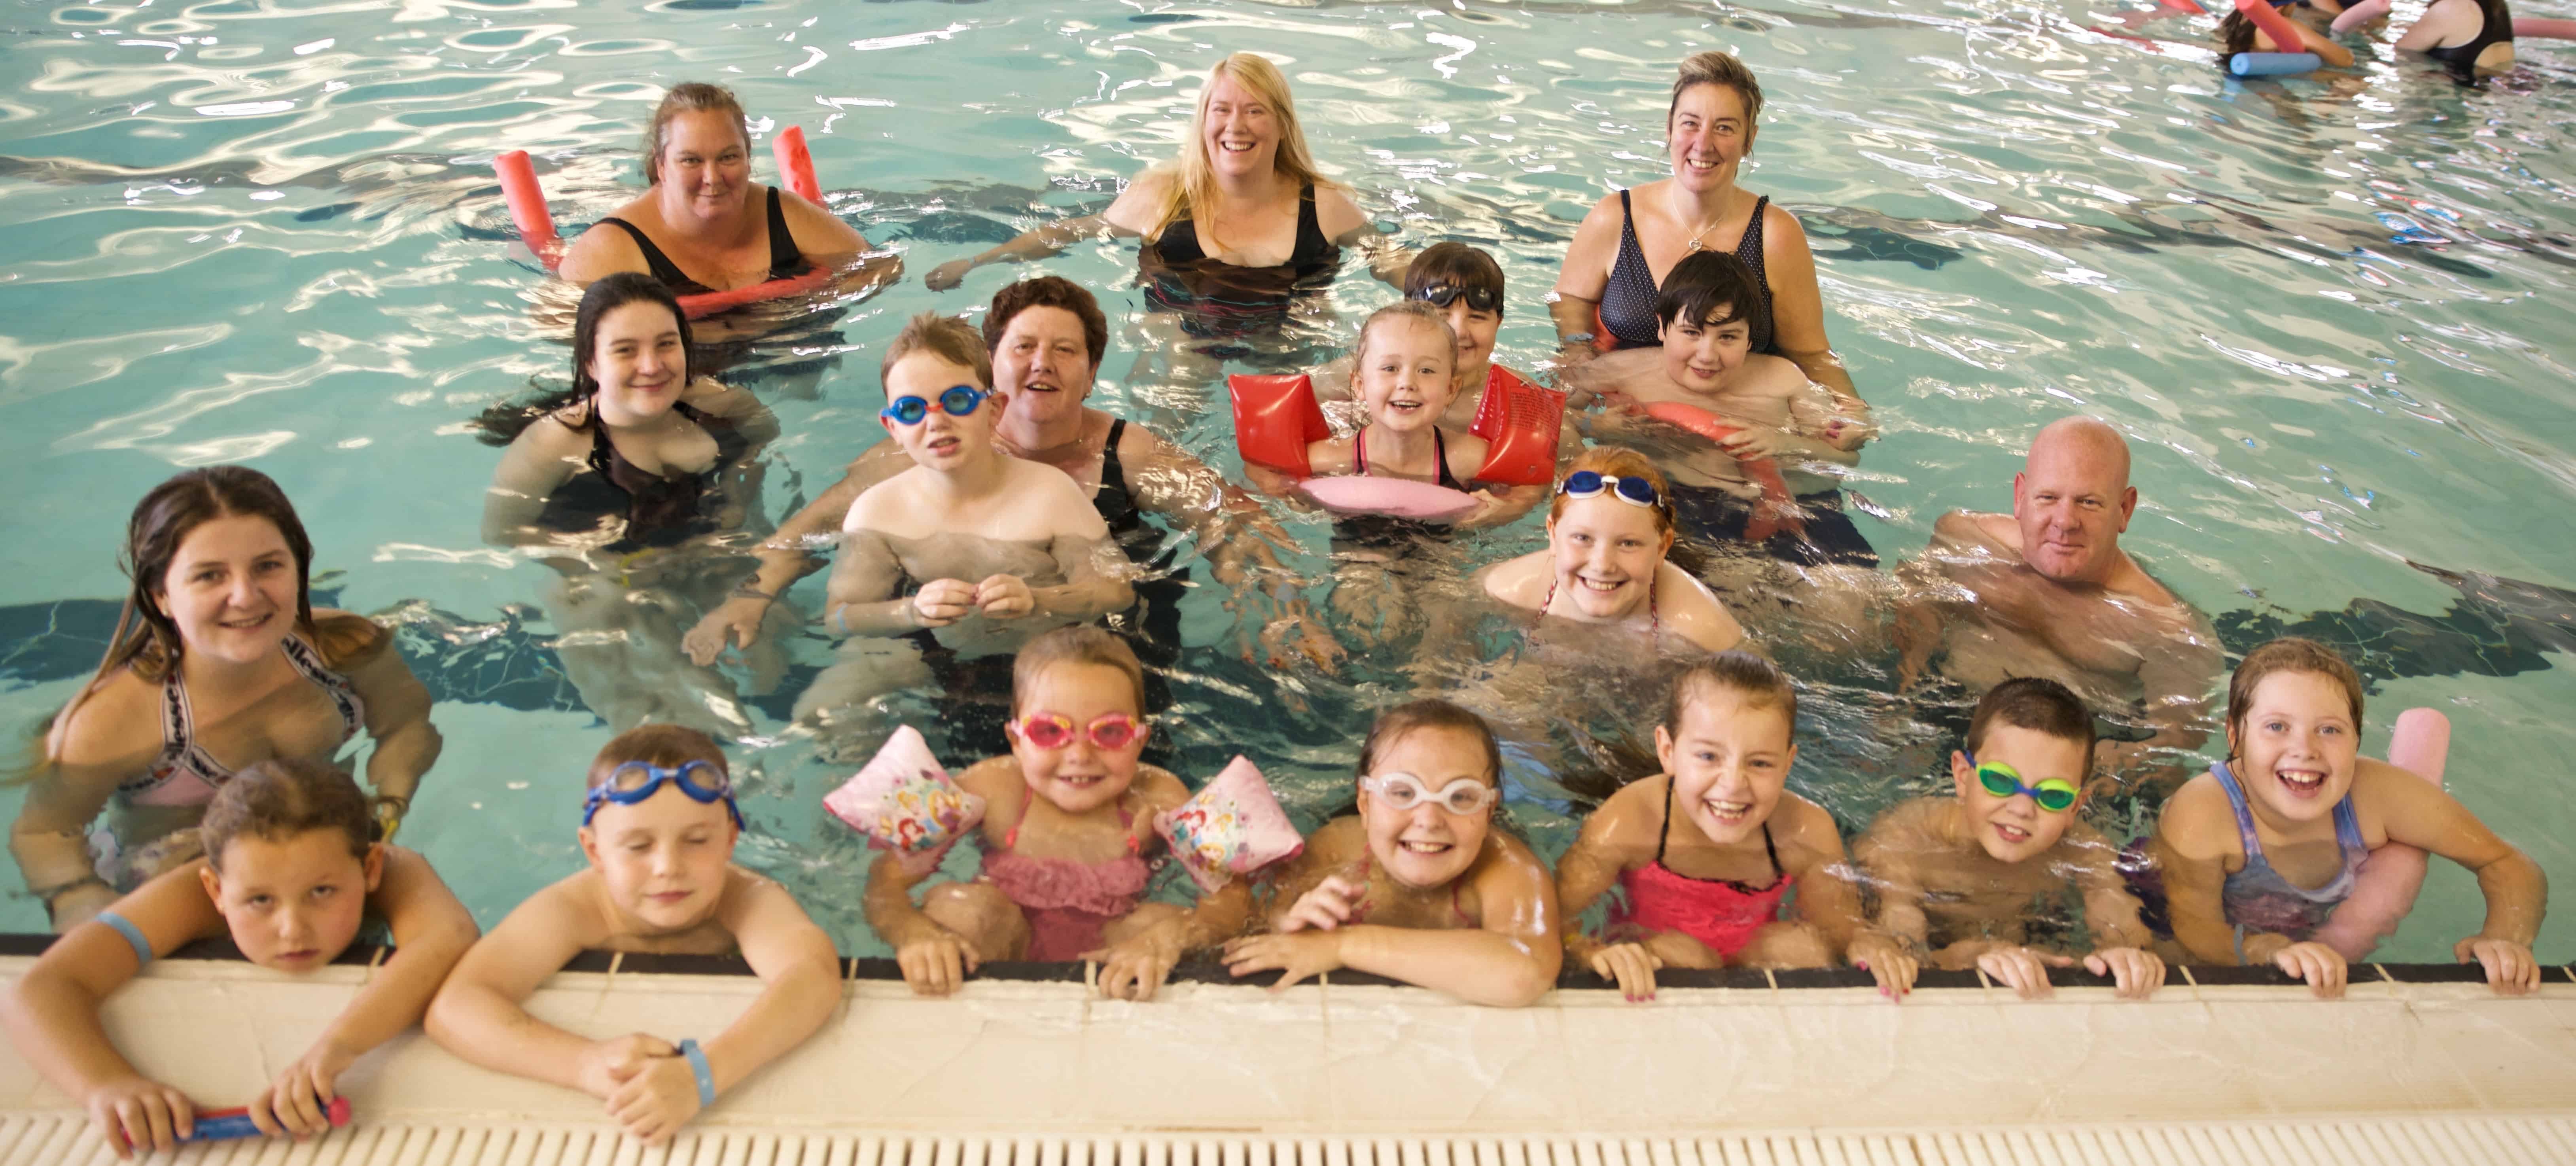 Brio gets community swimming together!